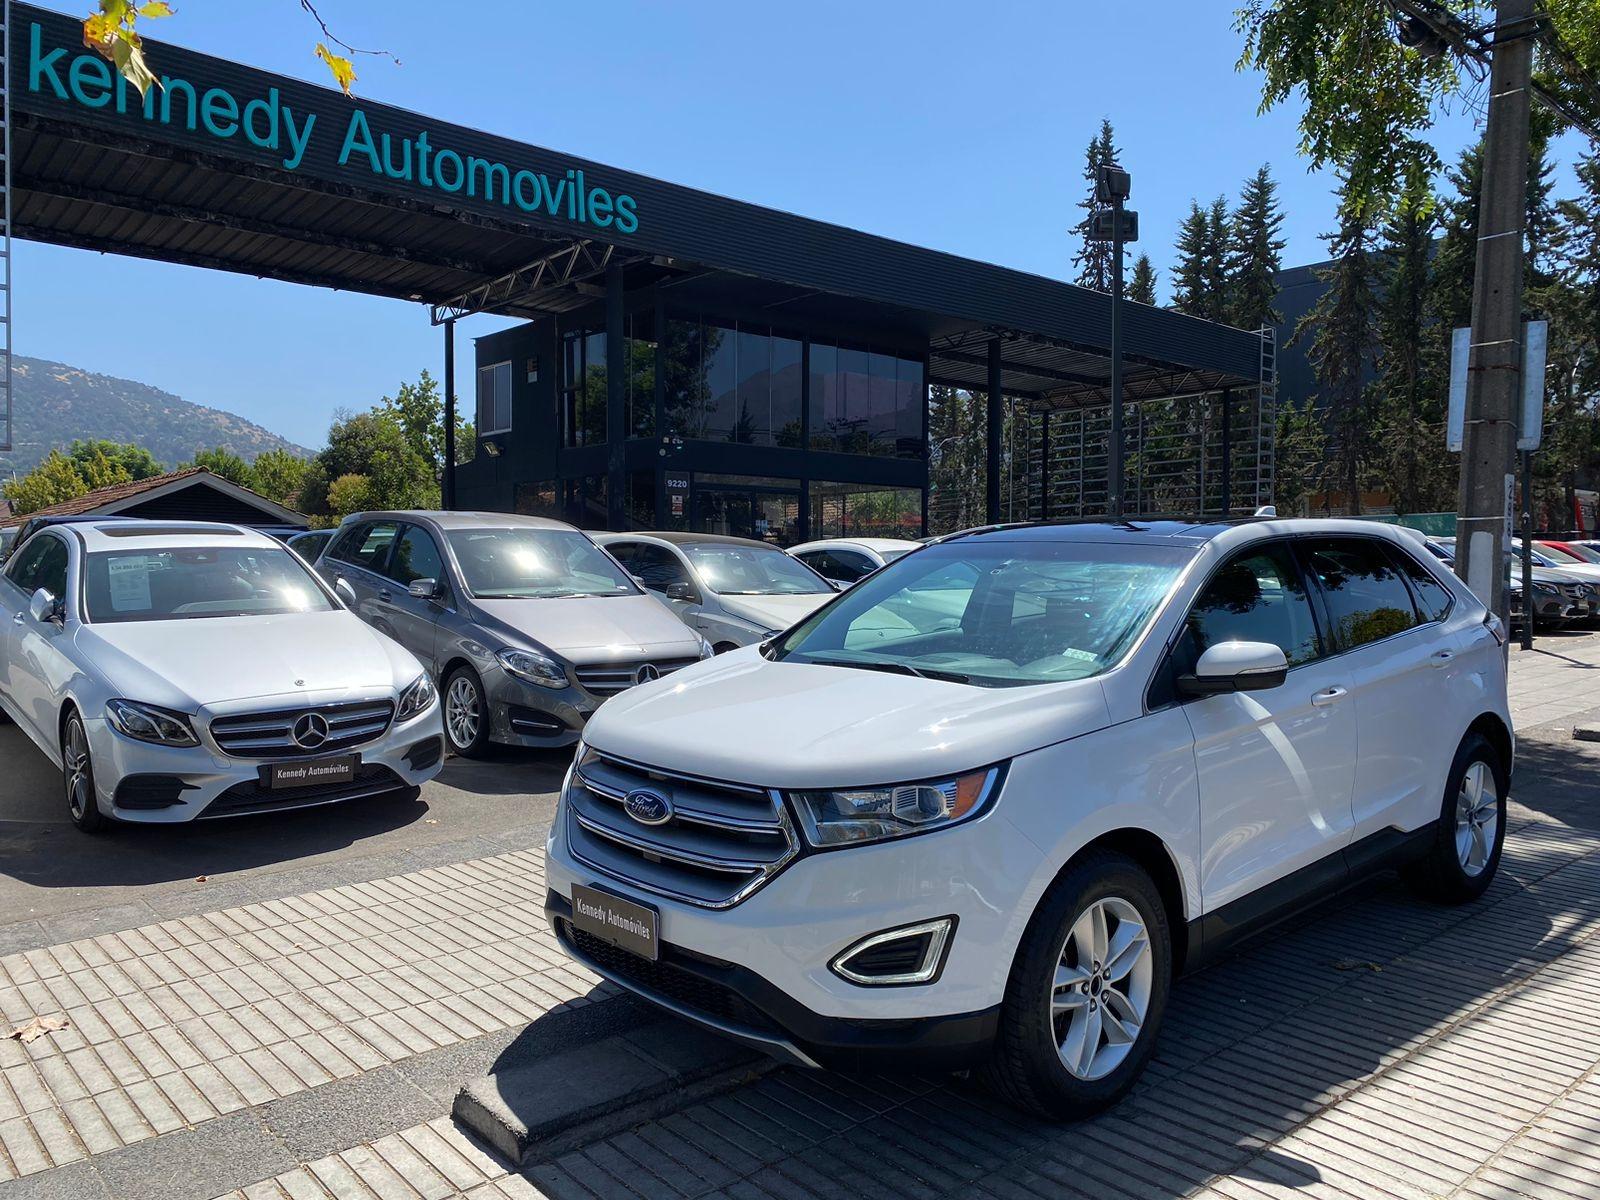 FORD EDGE 3.5  Auto SEL 4WD 2017 Impecable  - KENNEDY AUTOMOVILES